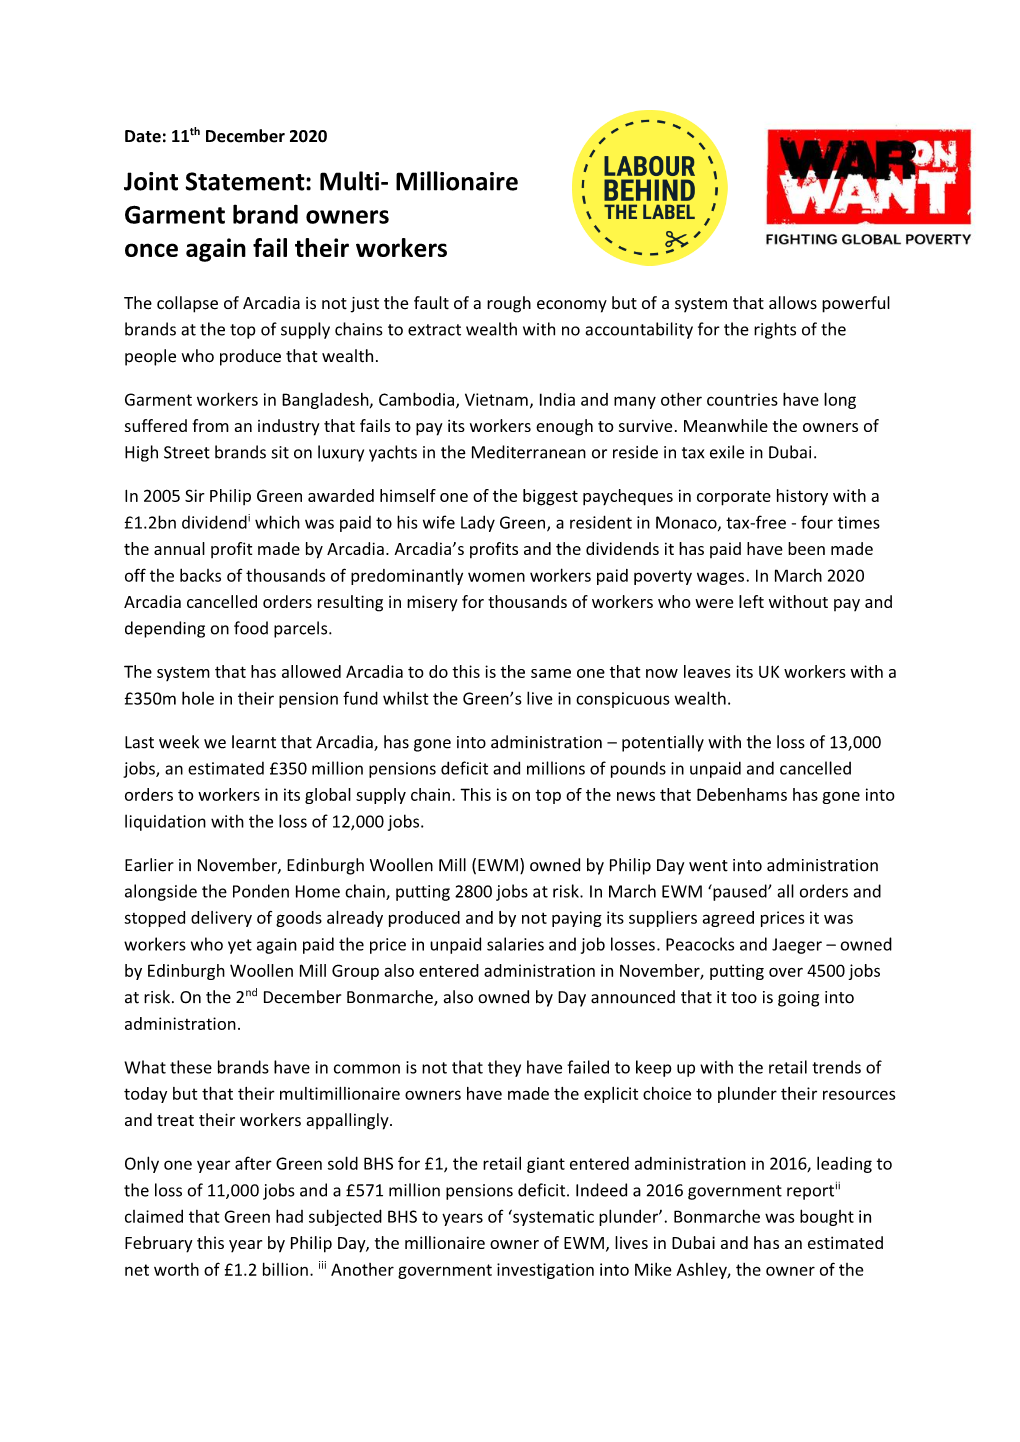 Joint Statement: Multi- Millionaire Garment Brand Owners Once Again Fail Their Workers